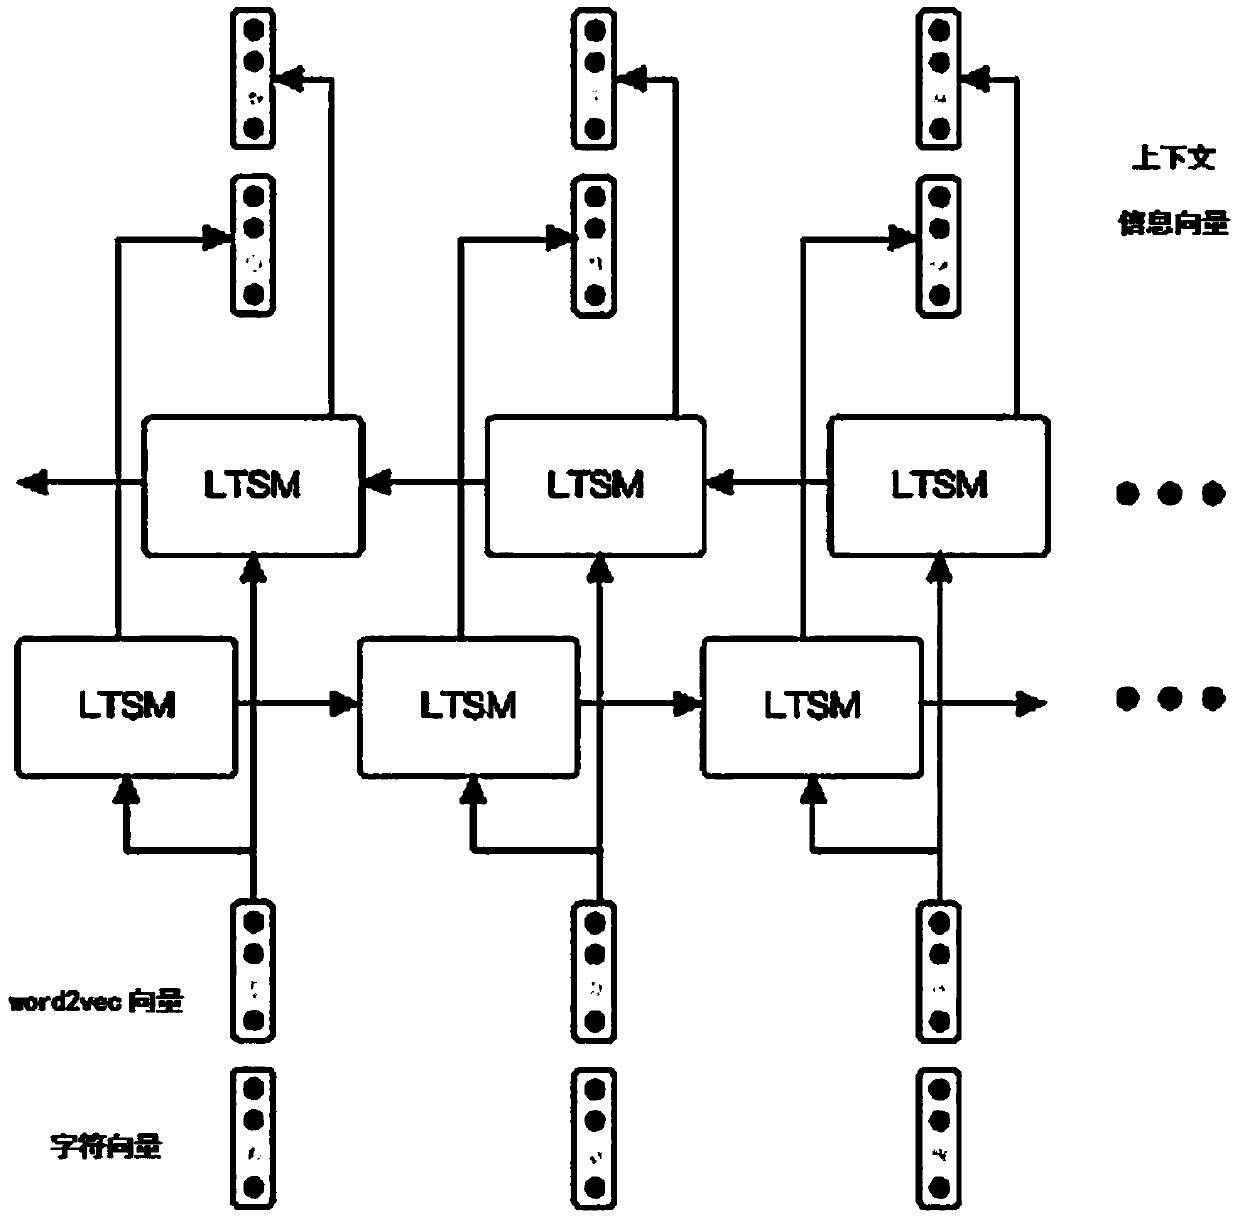 Chinese word segmentation method based on two-way LSTM, CNN and CRF